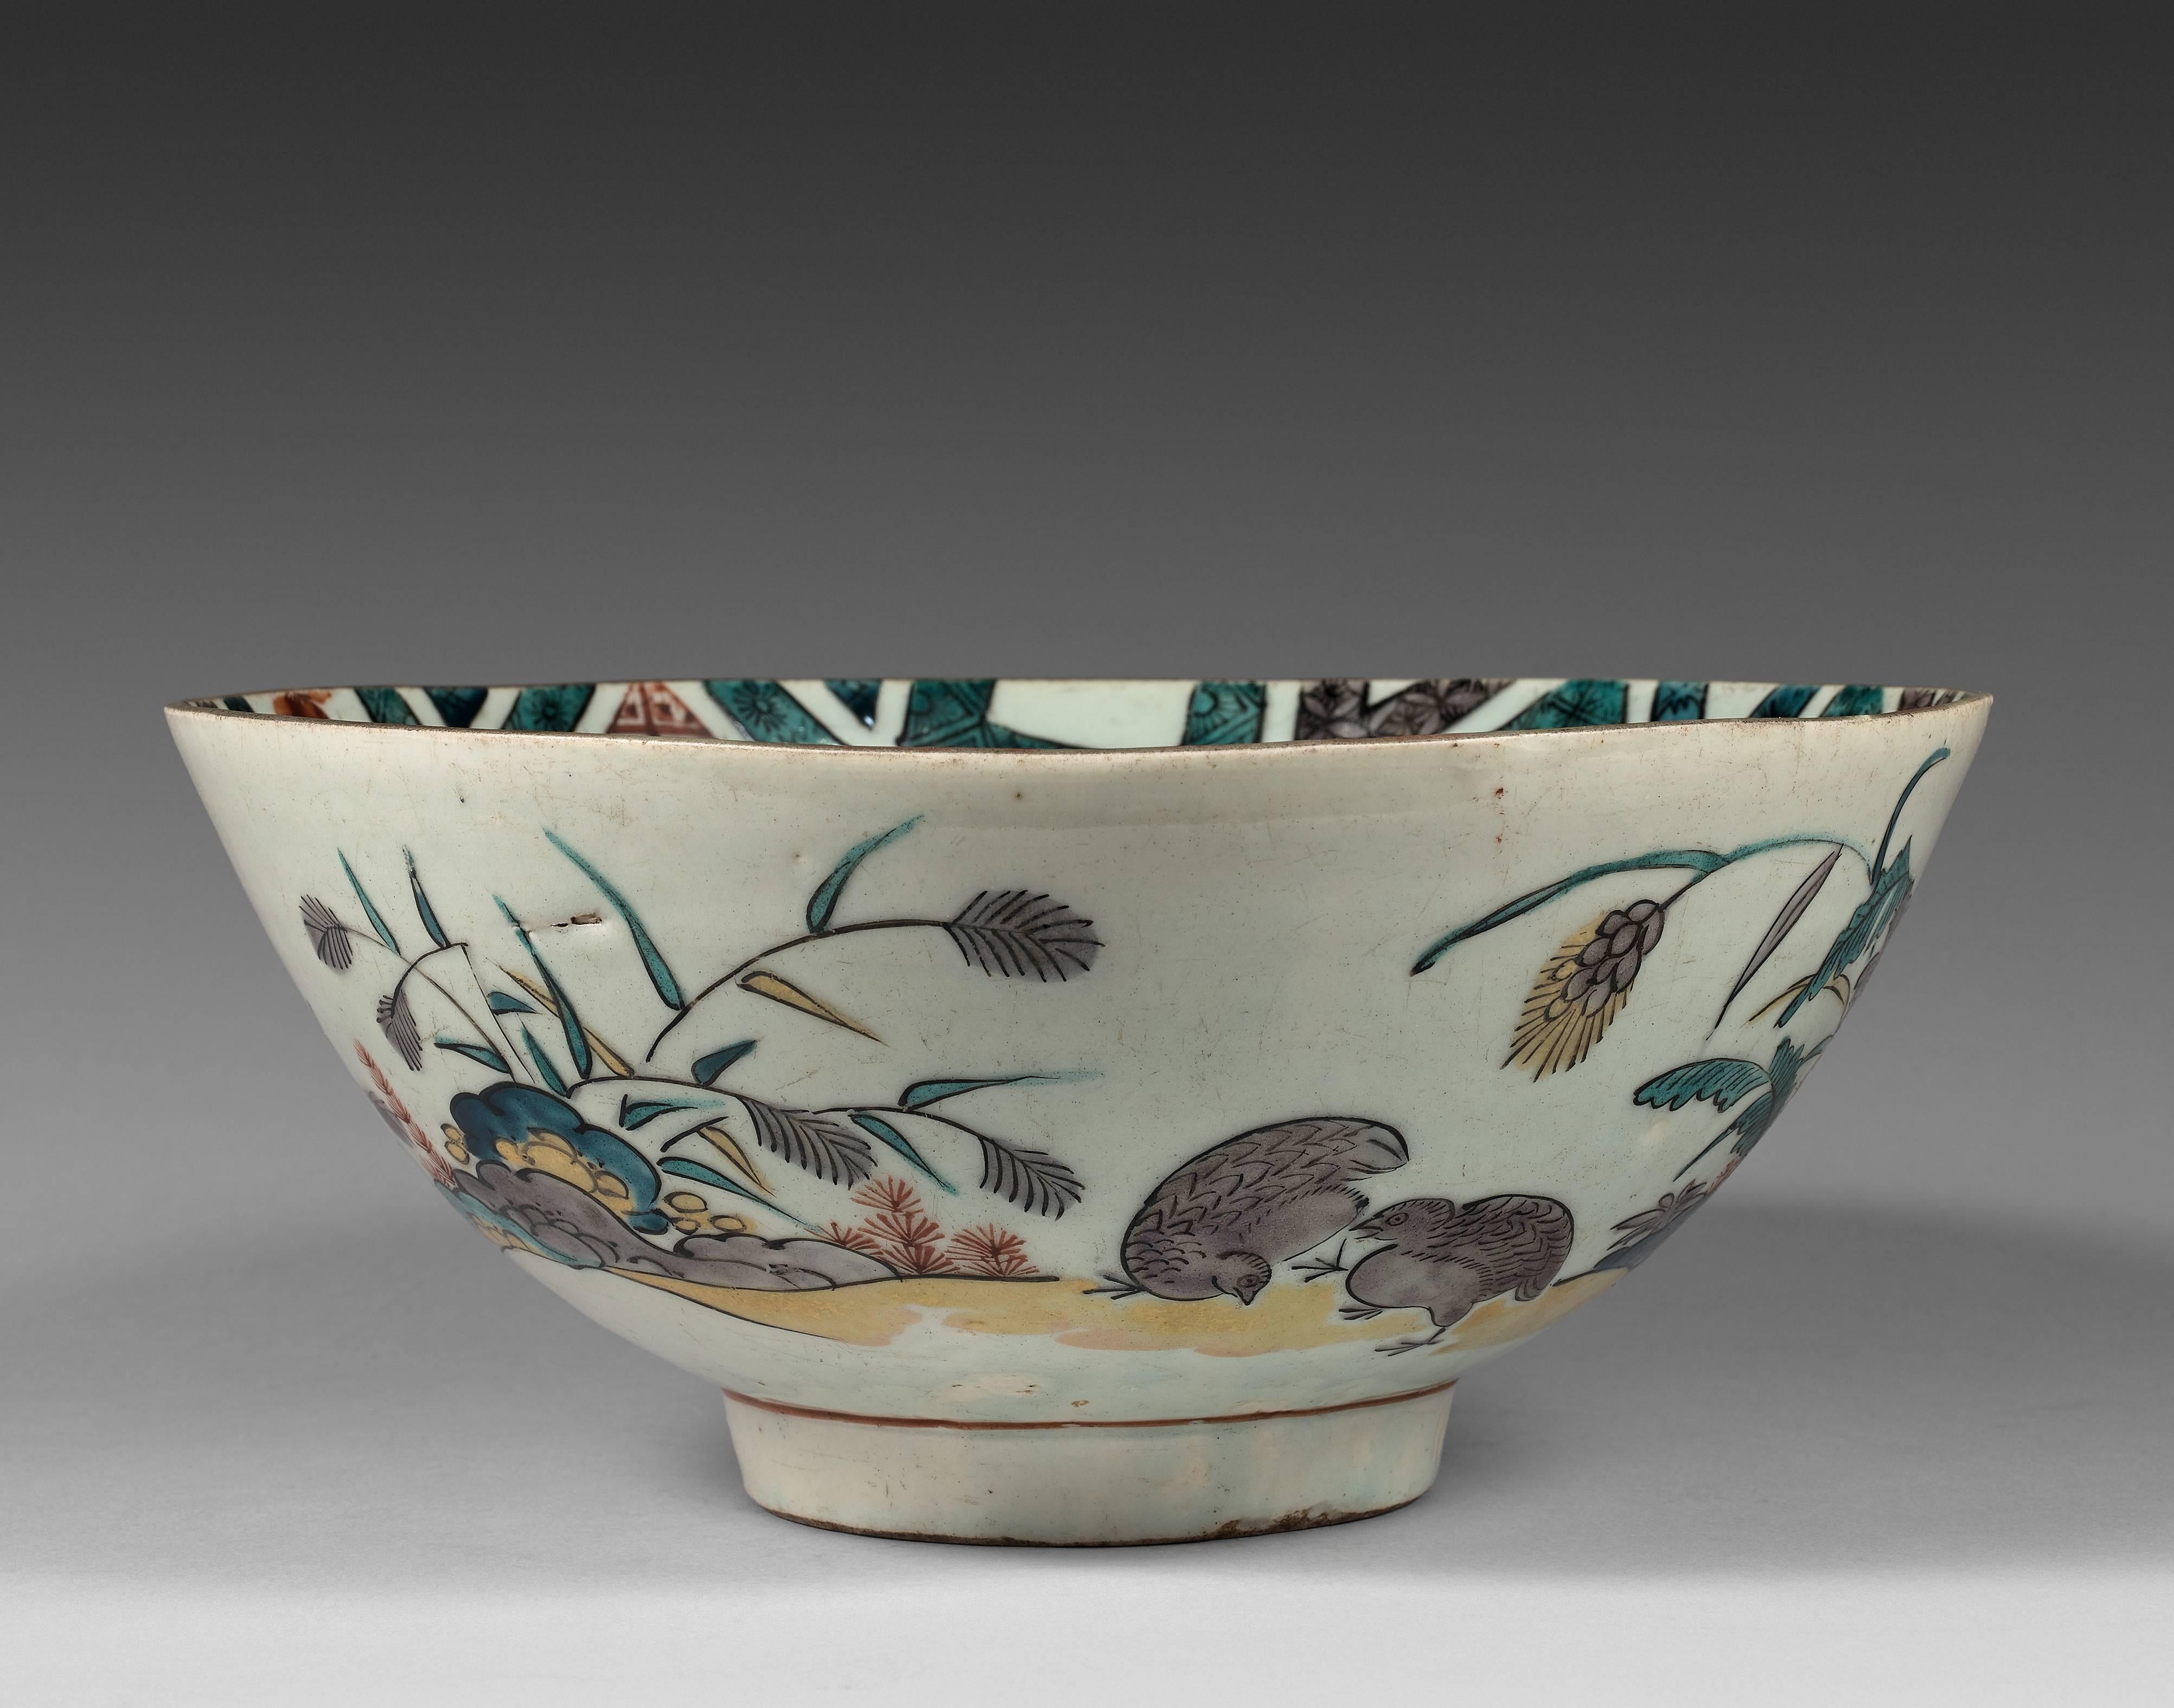 The bowl with a slightly rounded body resting on a short cylindrical foot. The inside with a decor of phoenix and cherry blossoms in diamonds with cash coins ground. The outside with quails among the millets. The base with Fuku mark in black and